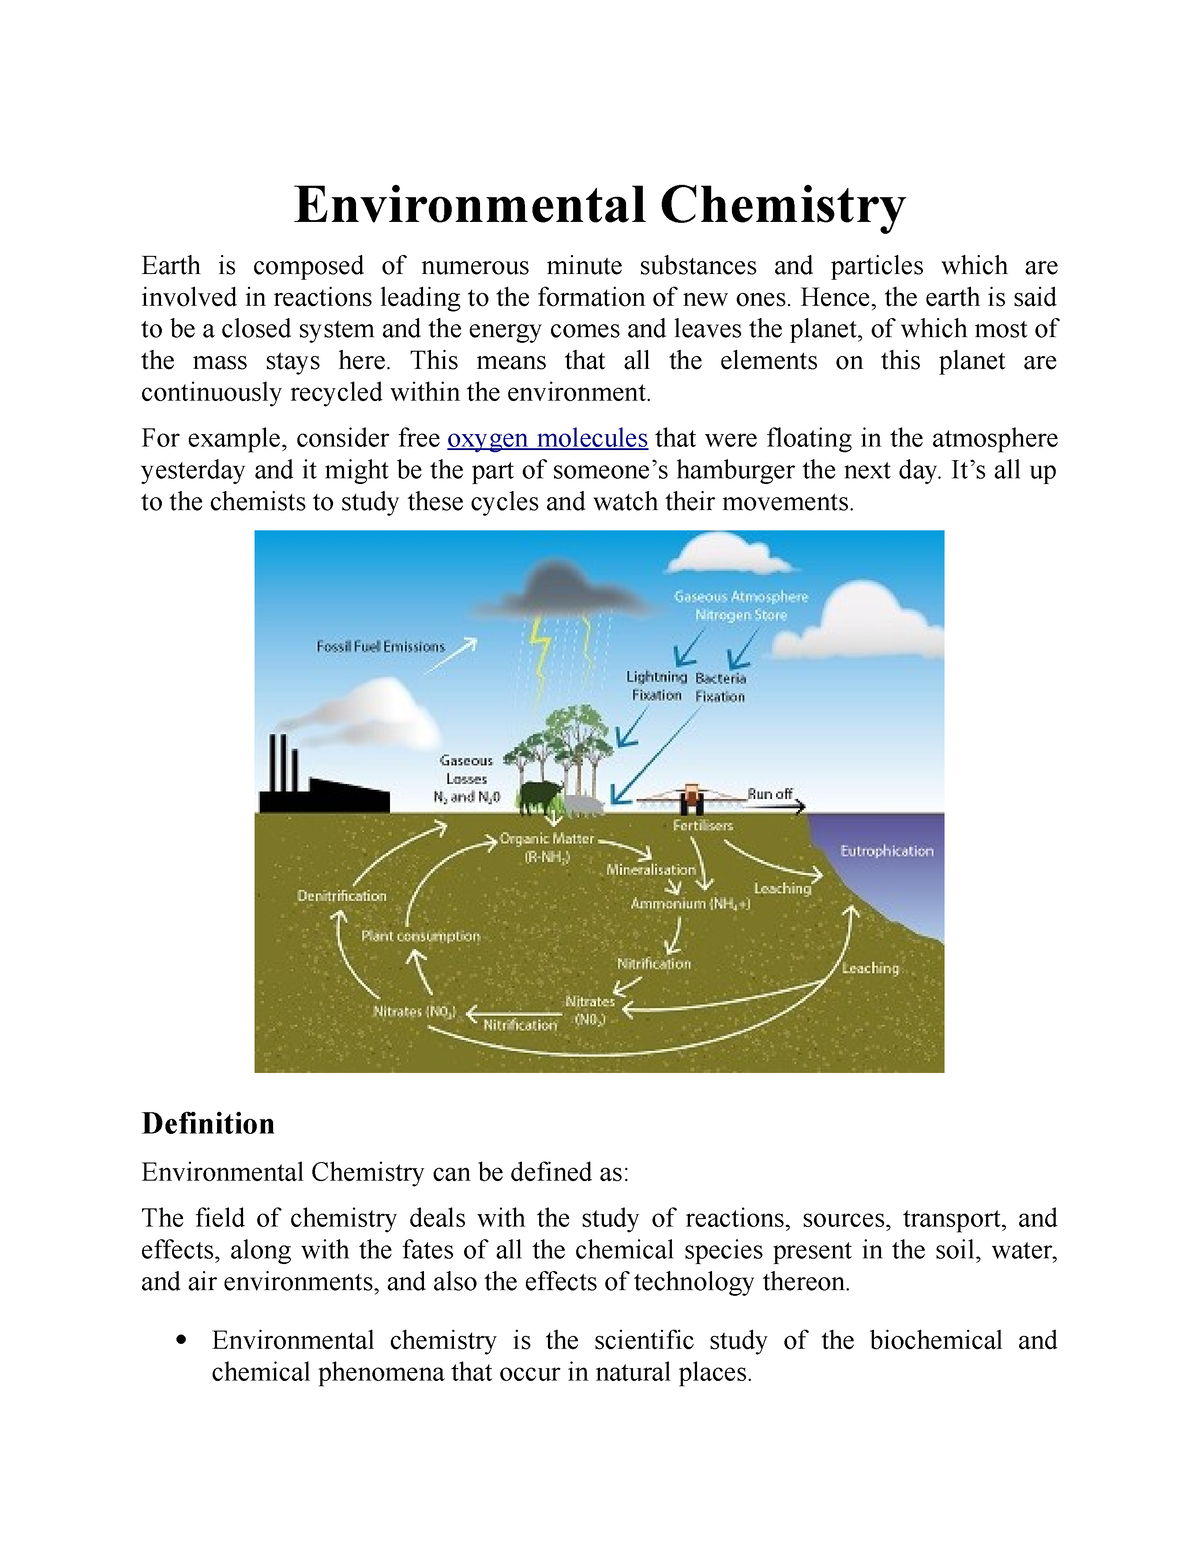 research paper on environmental chemistry